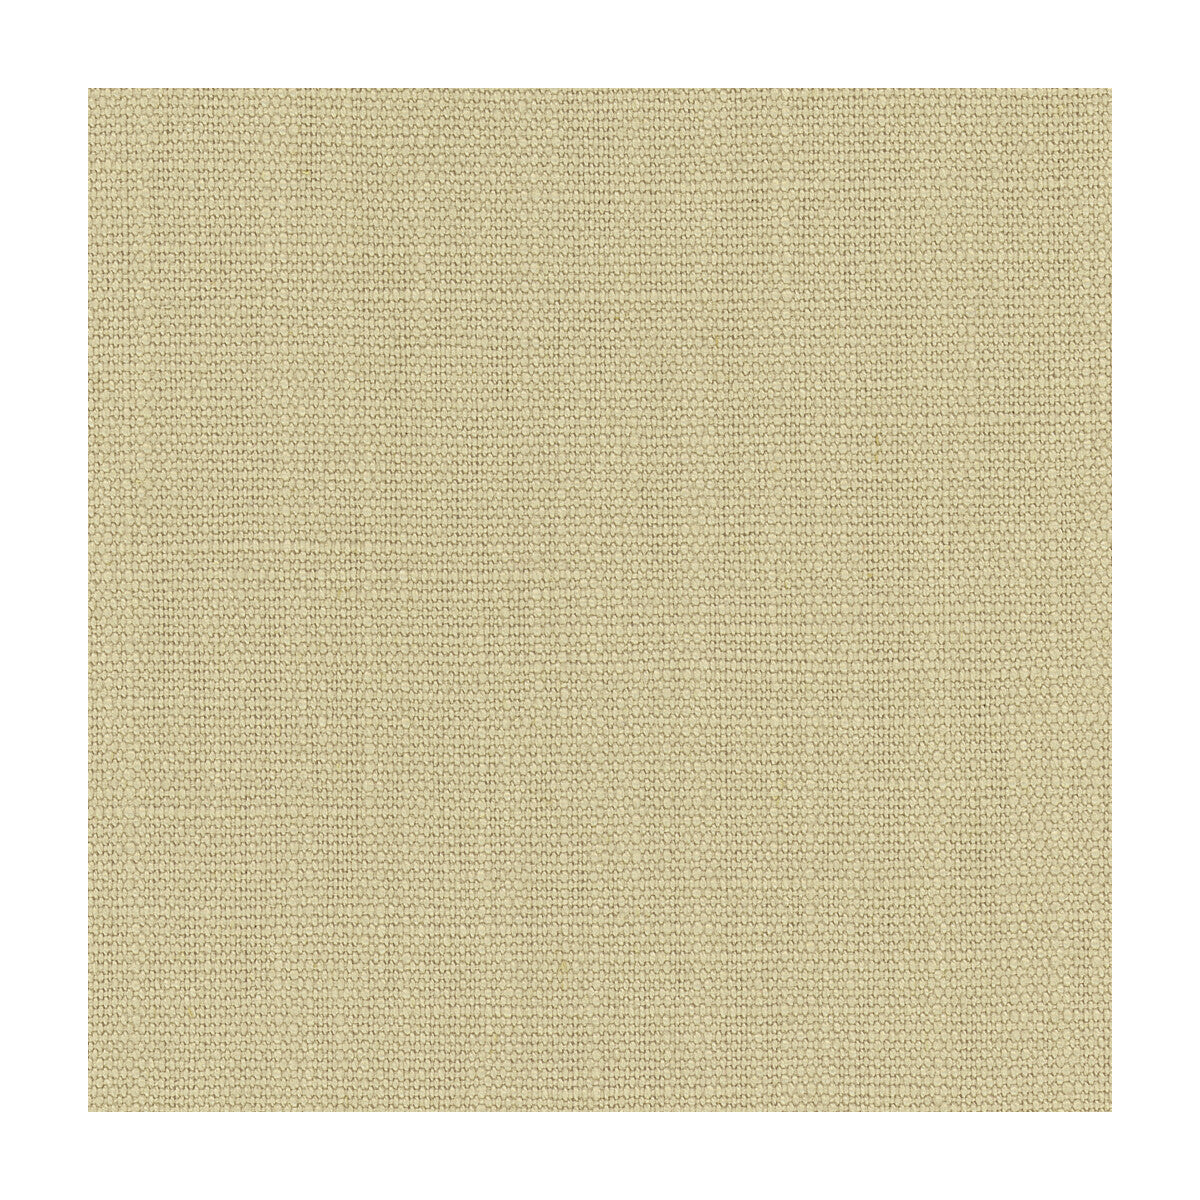 Kravet Basics fabric in 33771-52 color - pattern 33771.52.0 - by Kravet Basics in the Perfect Plains collection